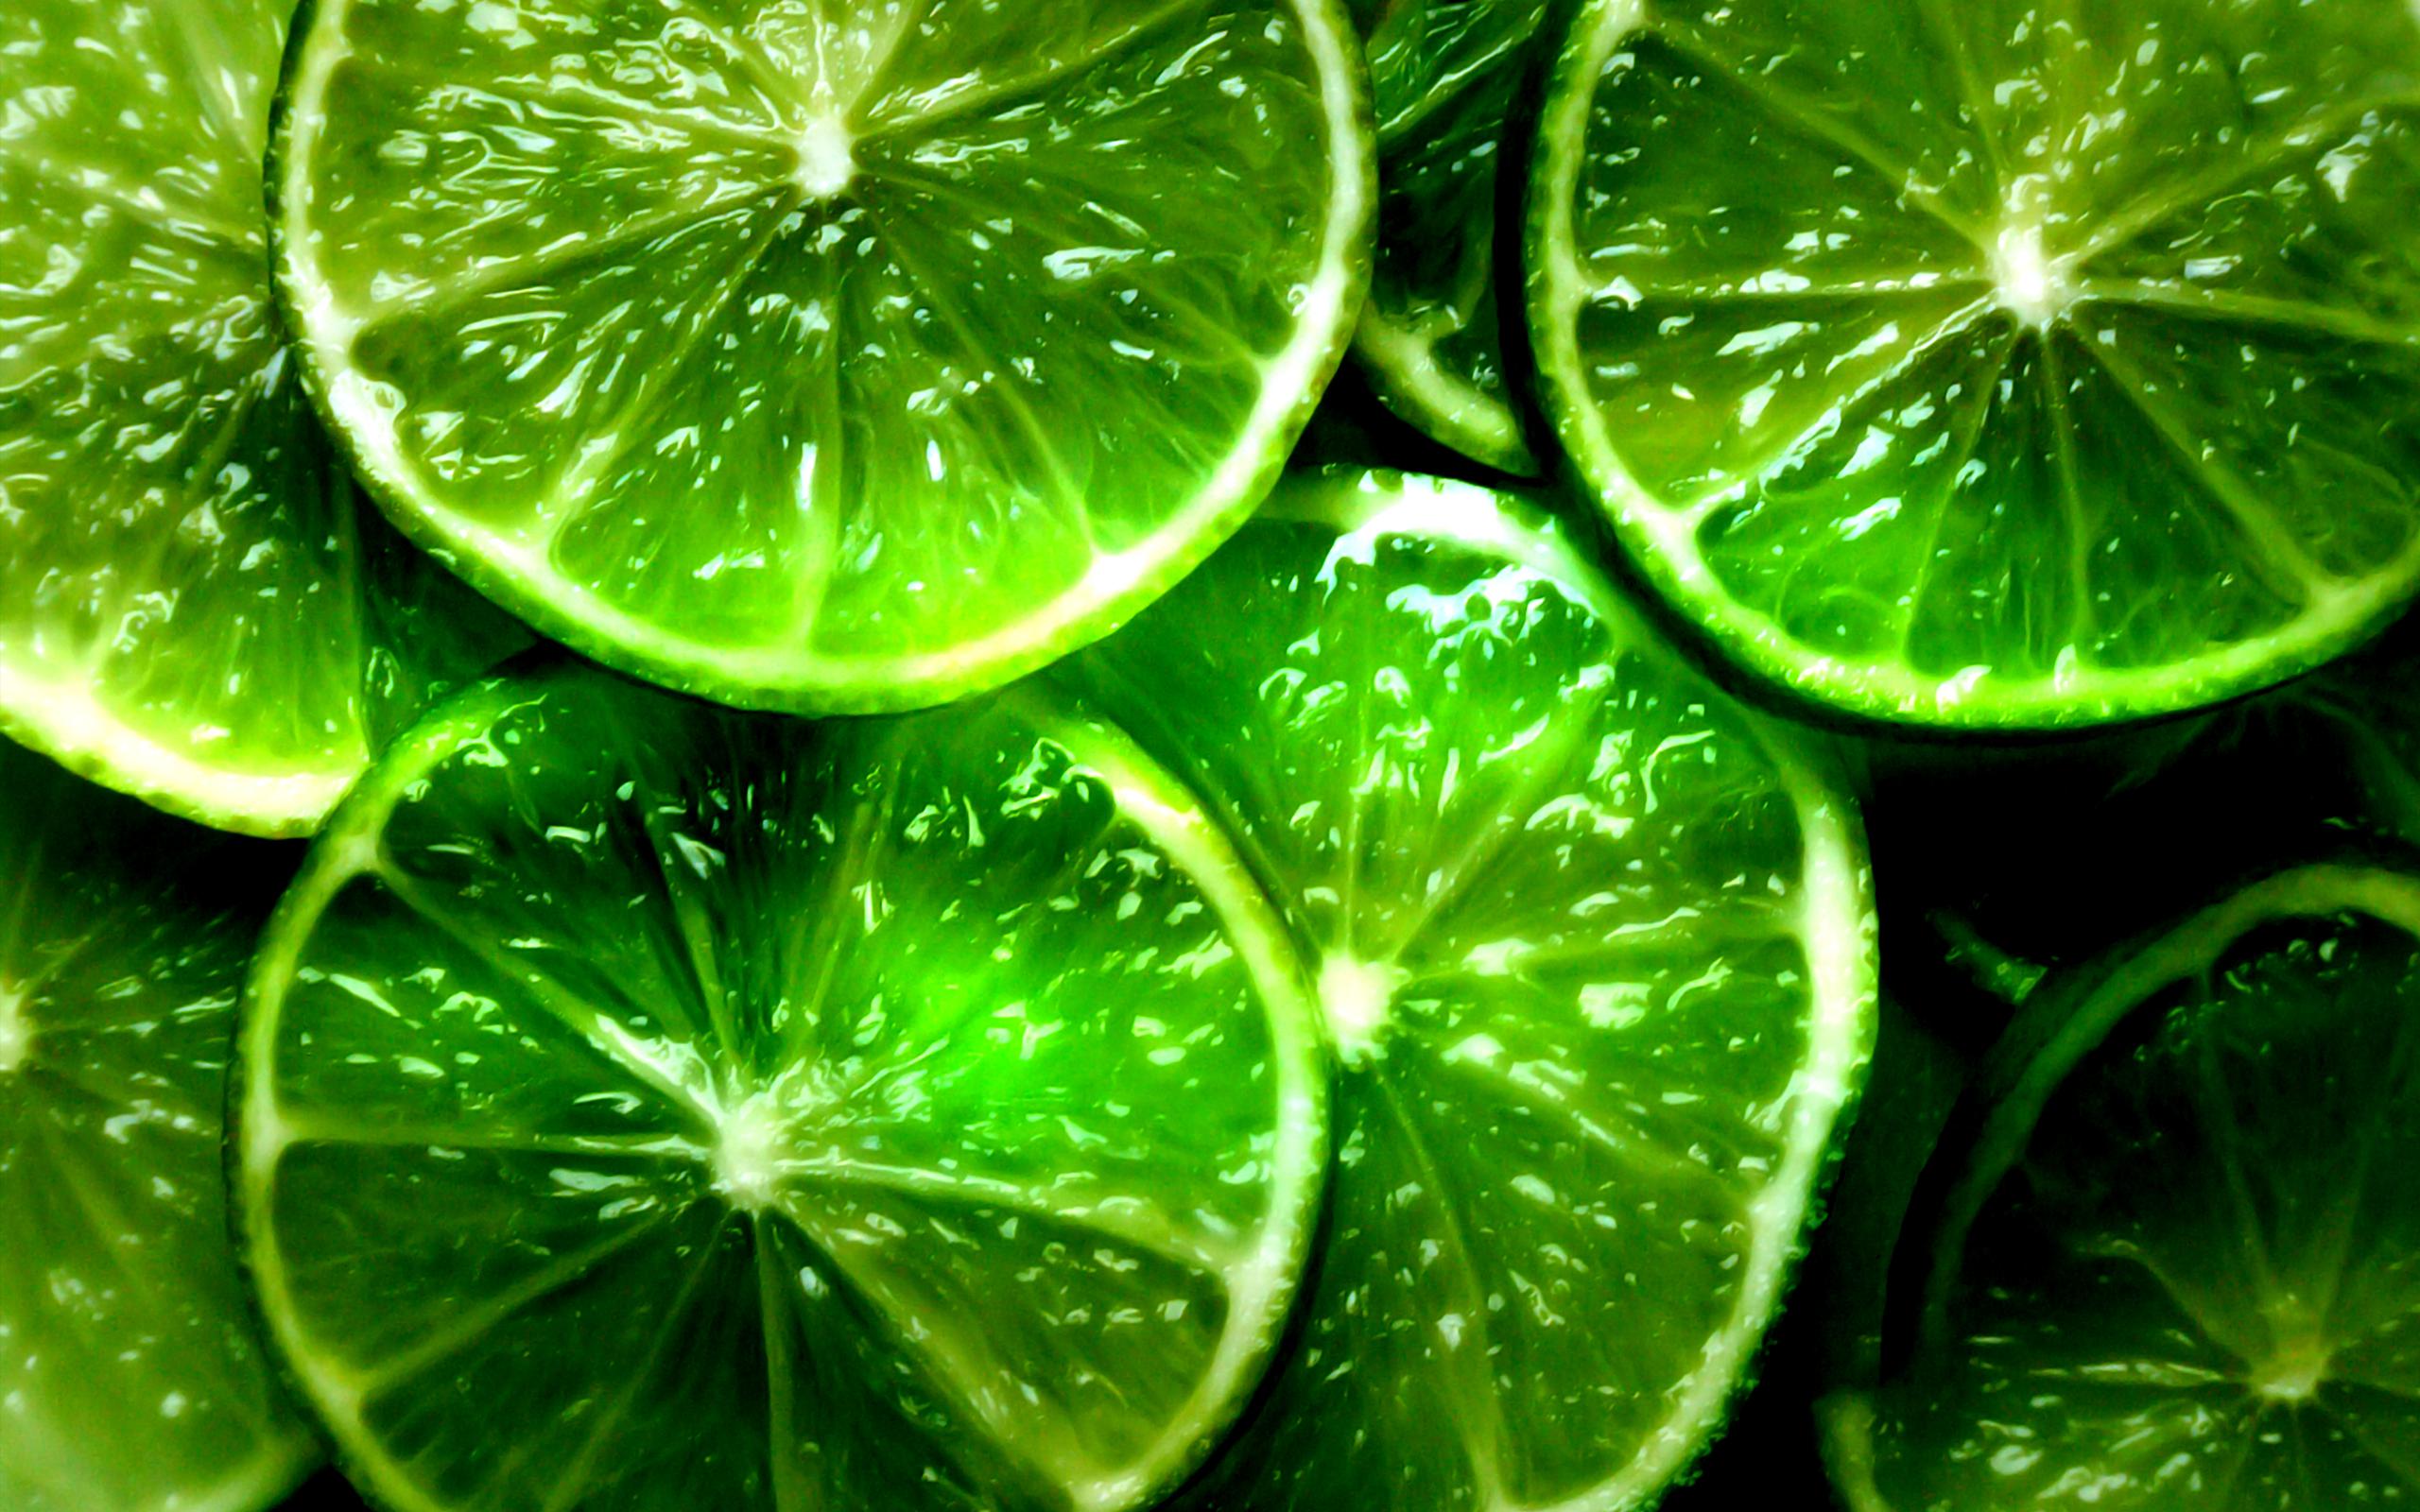 Download Lemon wallpapers for mobile phone free Lemon HD pictures